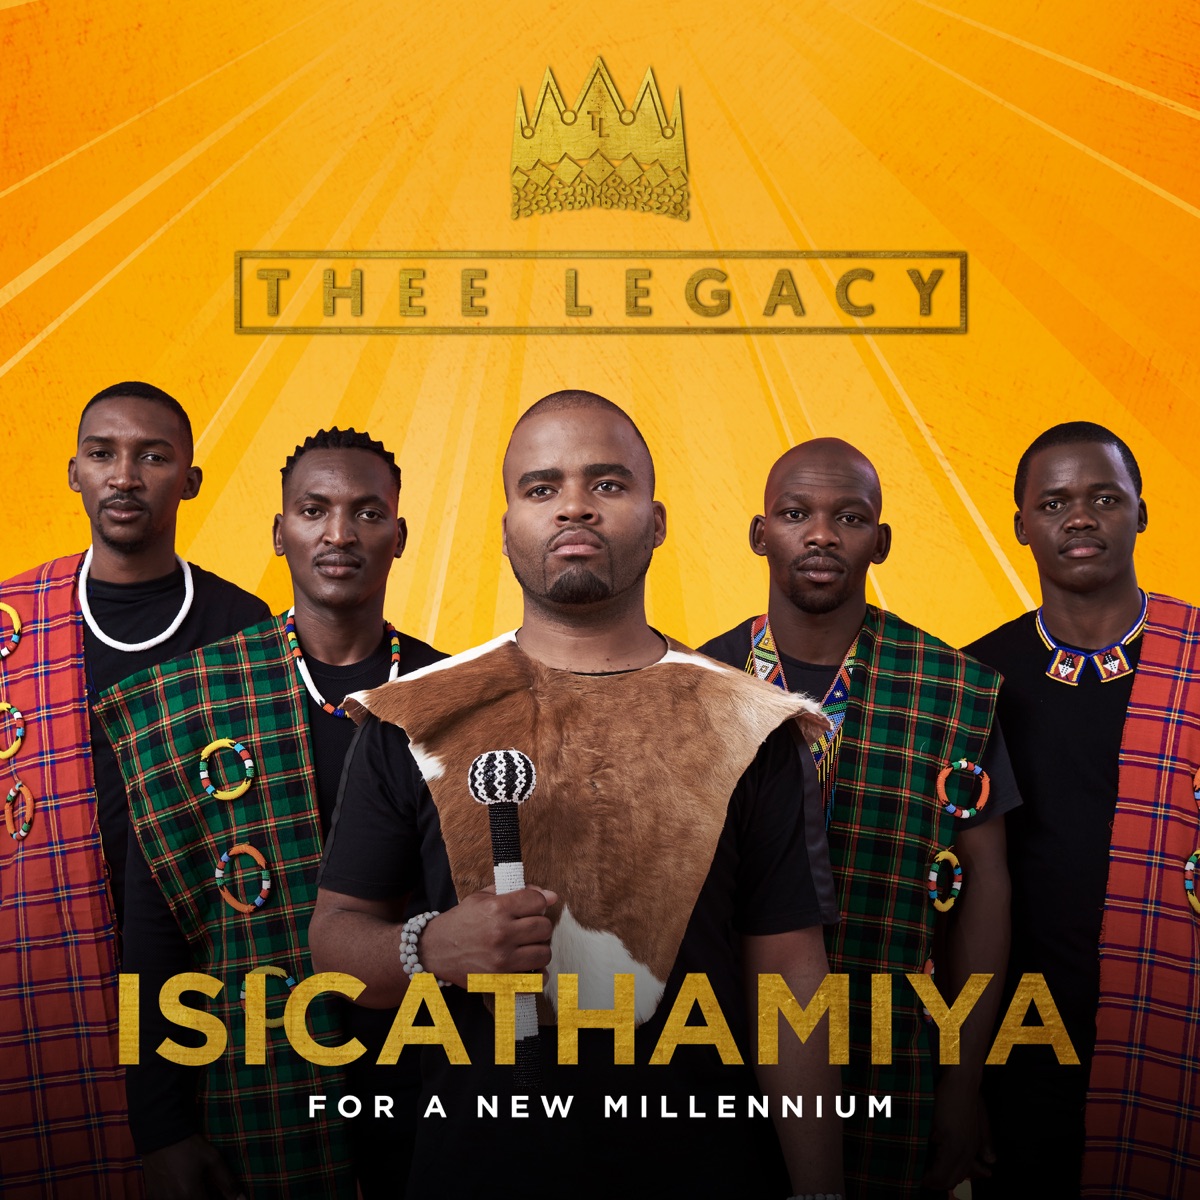 MP3: Thee Legacy – Greatest Gift